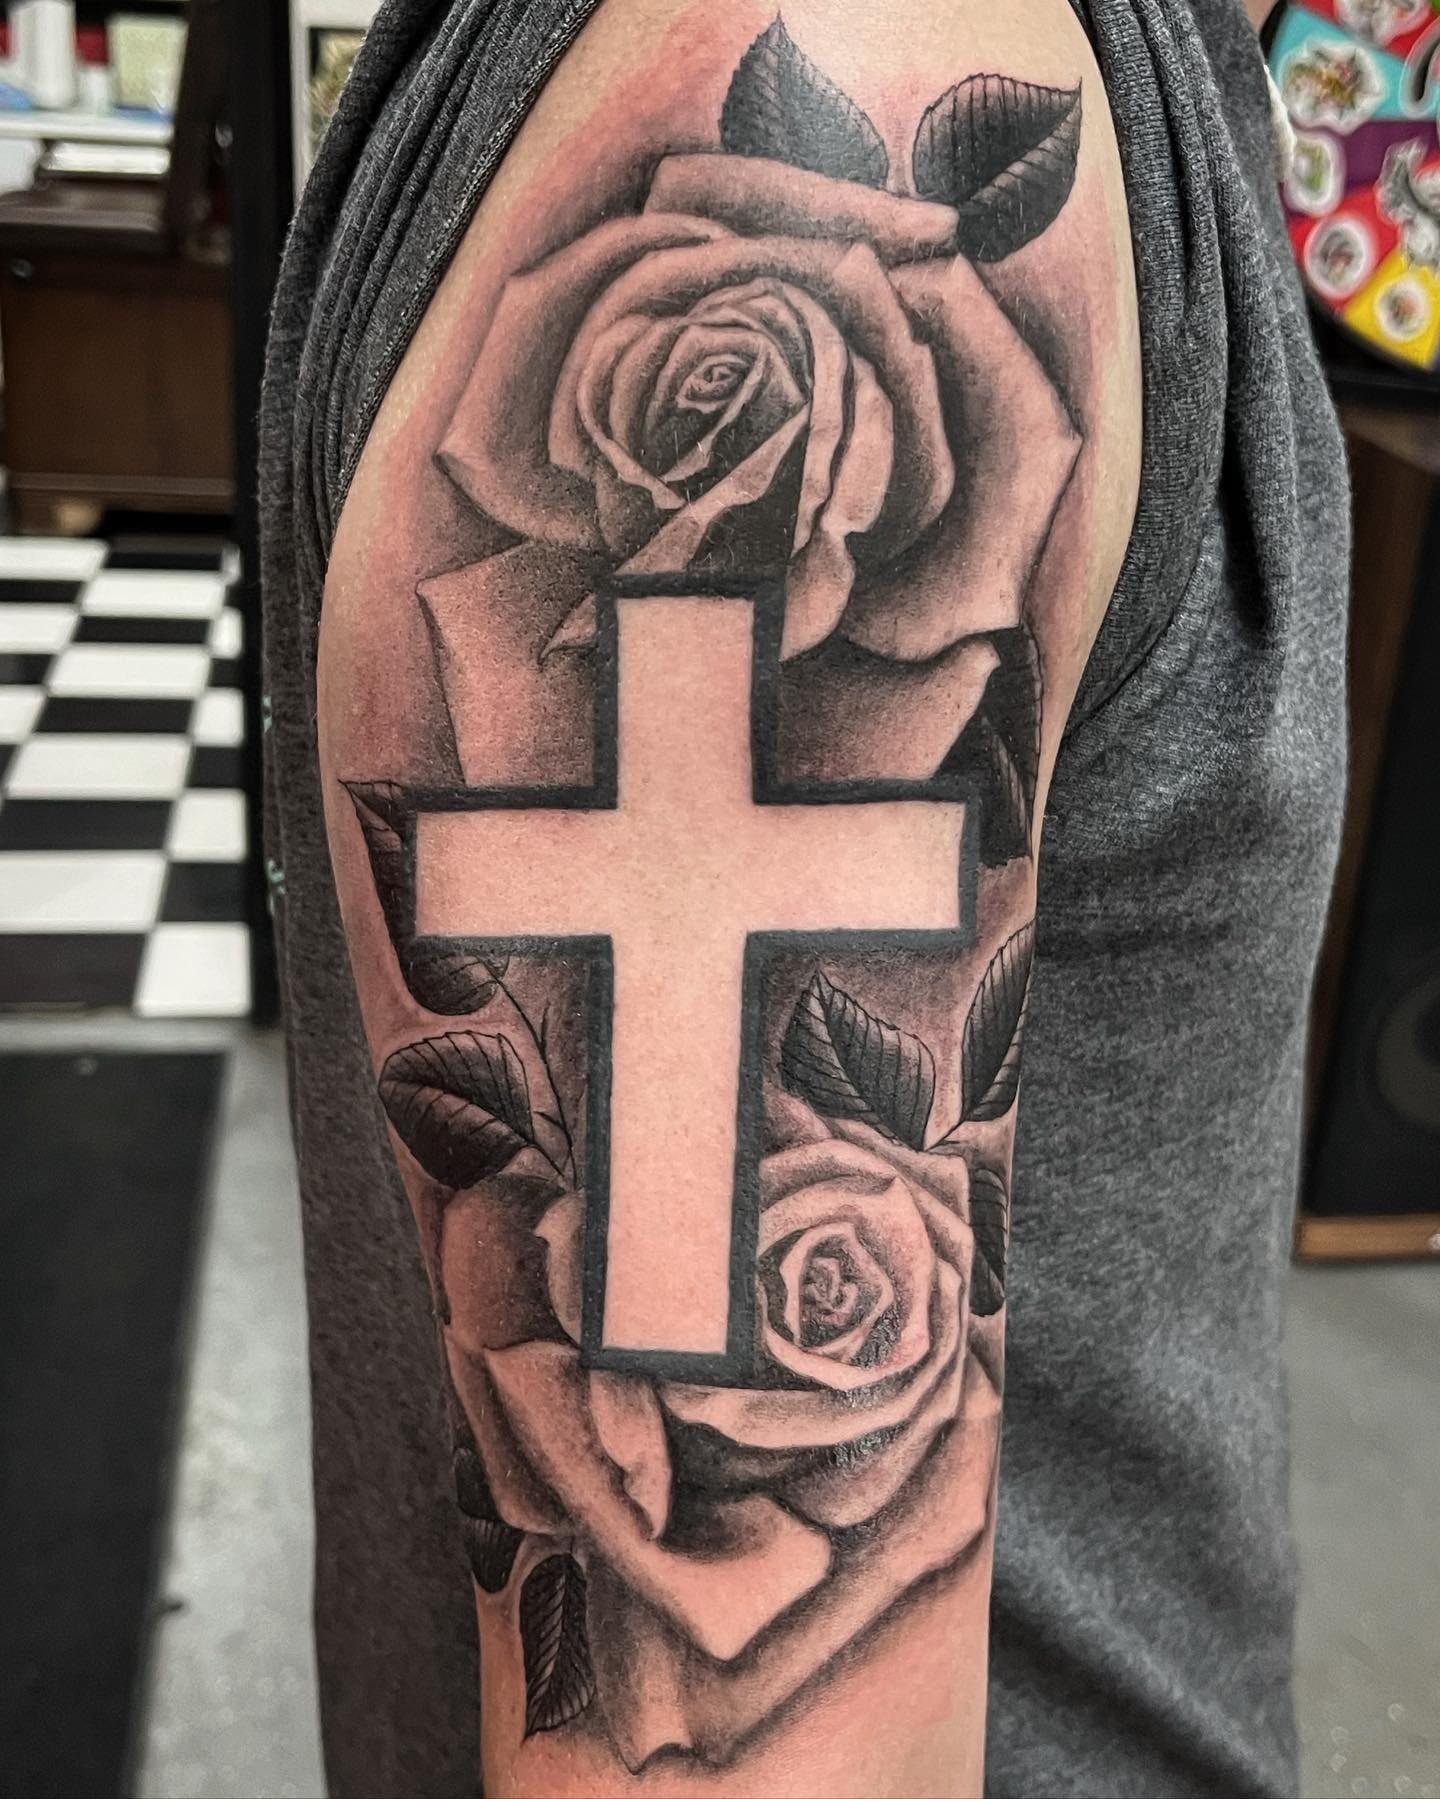 Being one of the most iconic designs for tattoos, roses are so popular. You know that roses symbolize love and romance and this meaning is what they are mostly associated with. To show your love for your religion, why don't you get a cross tattoo with roses behind?